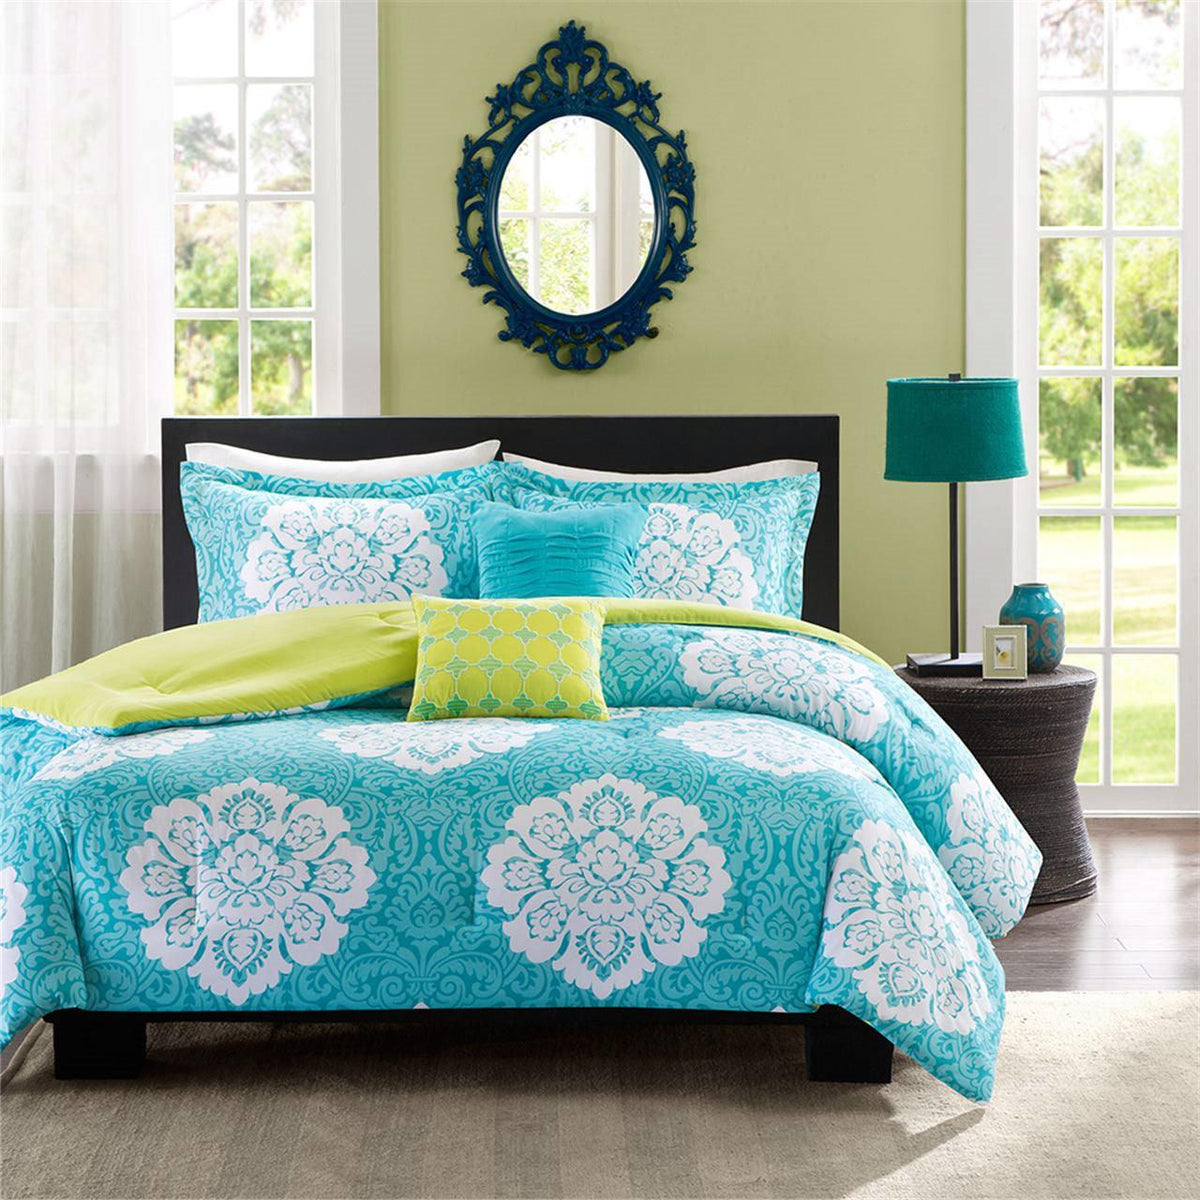 Twin size Teal Blue Damask Comforter Set with Green Accents - beddingbag.com